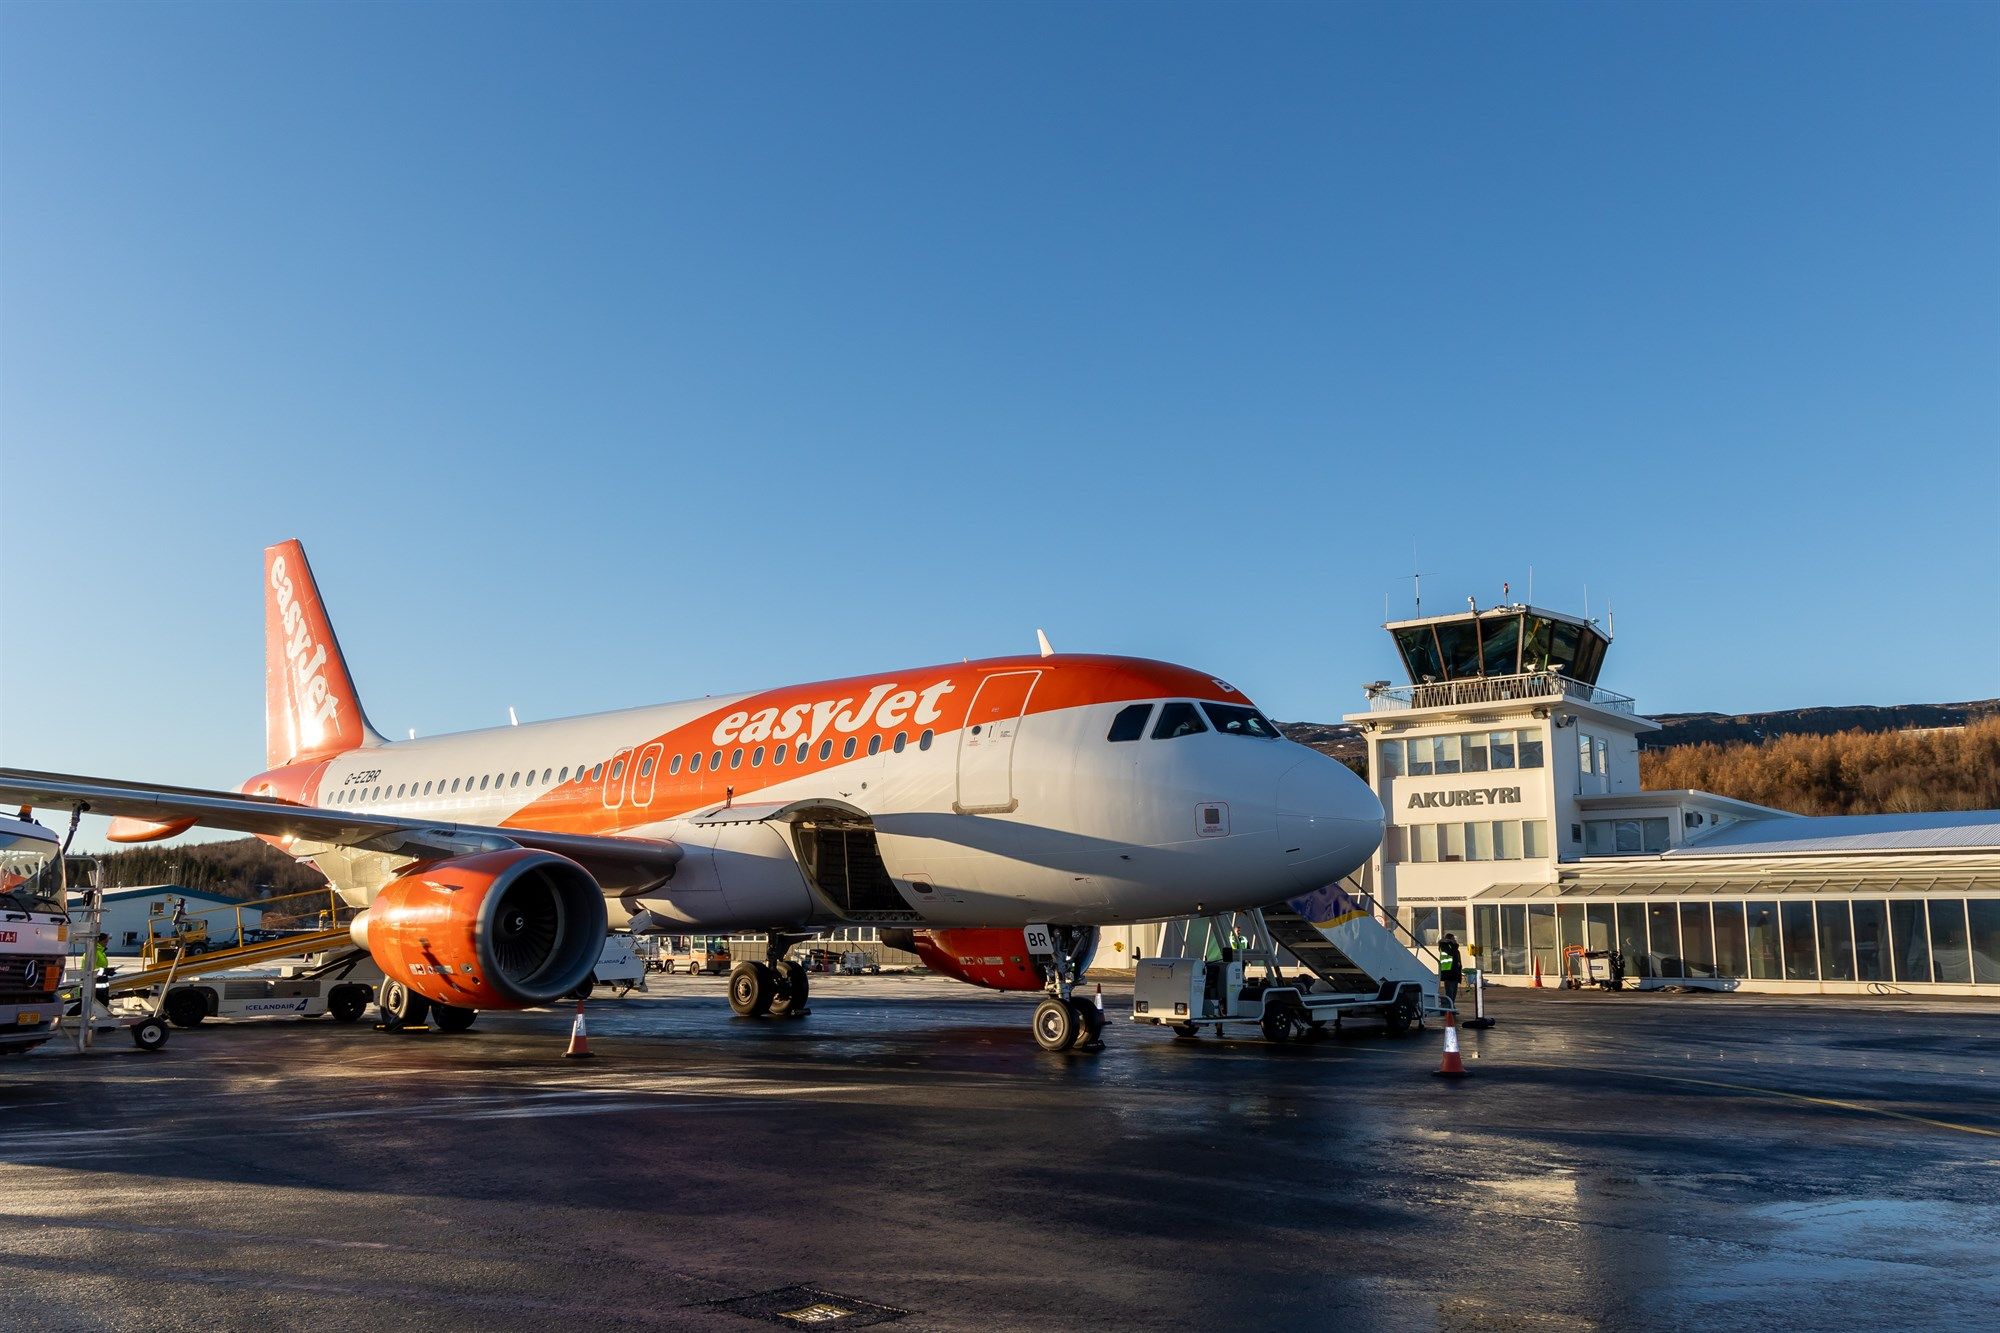 An easyjet Airbus A319 at Akureyri Airport in North Iceland